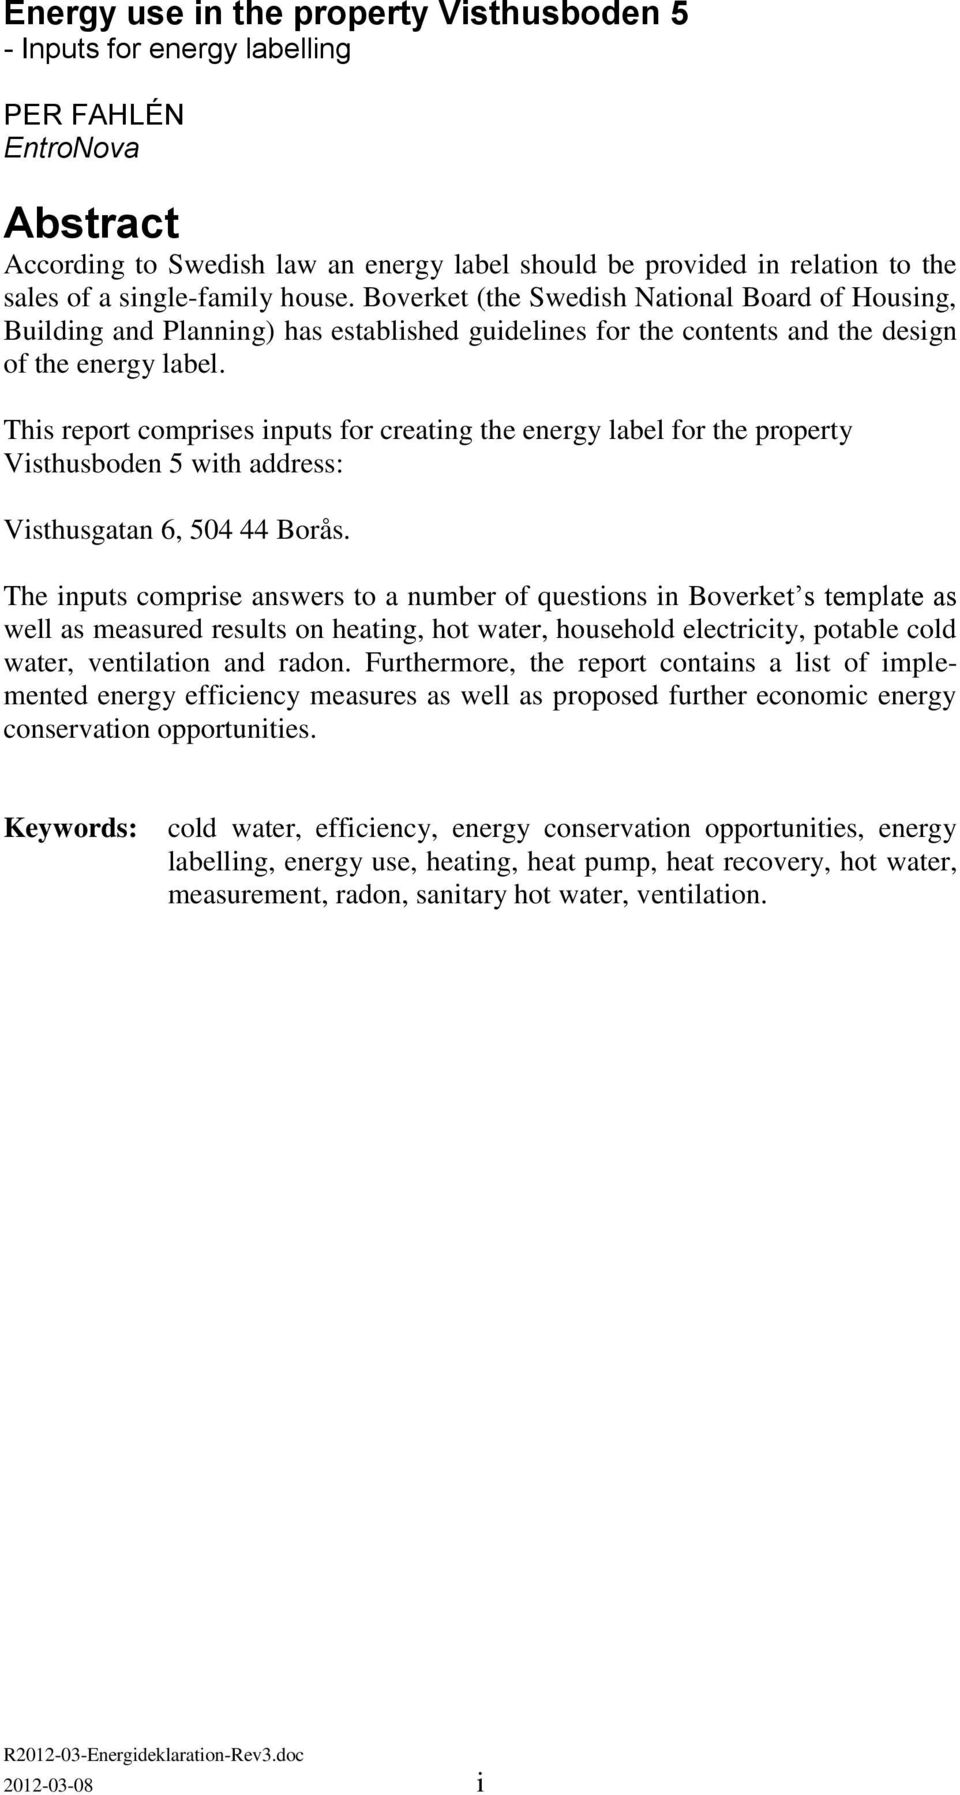 This report comprises inputs for creating the energy label for the property Visthusboden 5 with address: Visthusgatan 6, 504 44 Borås.